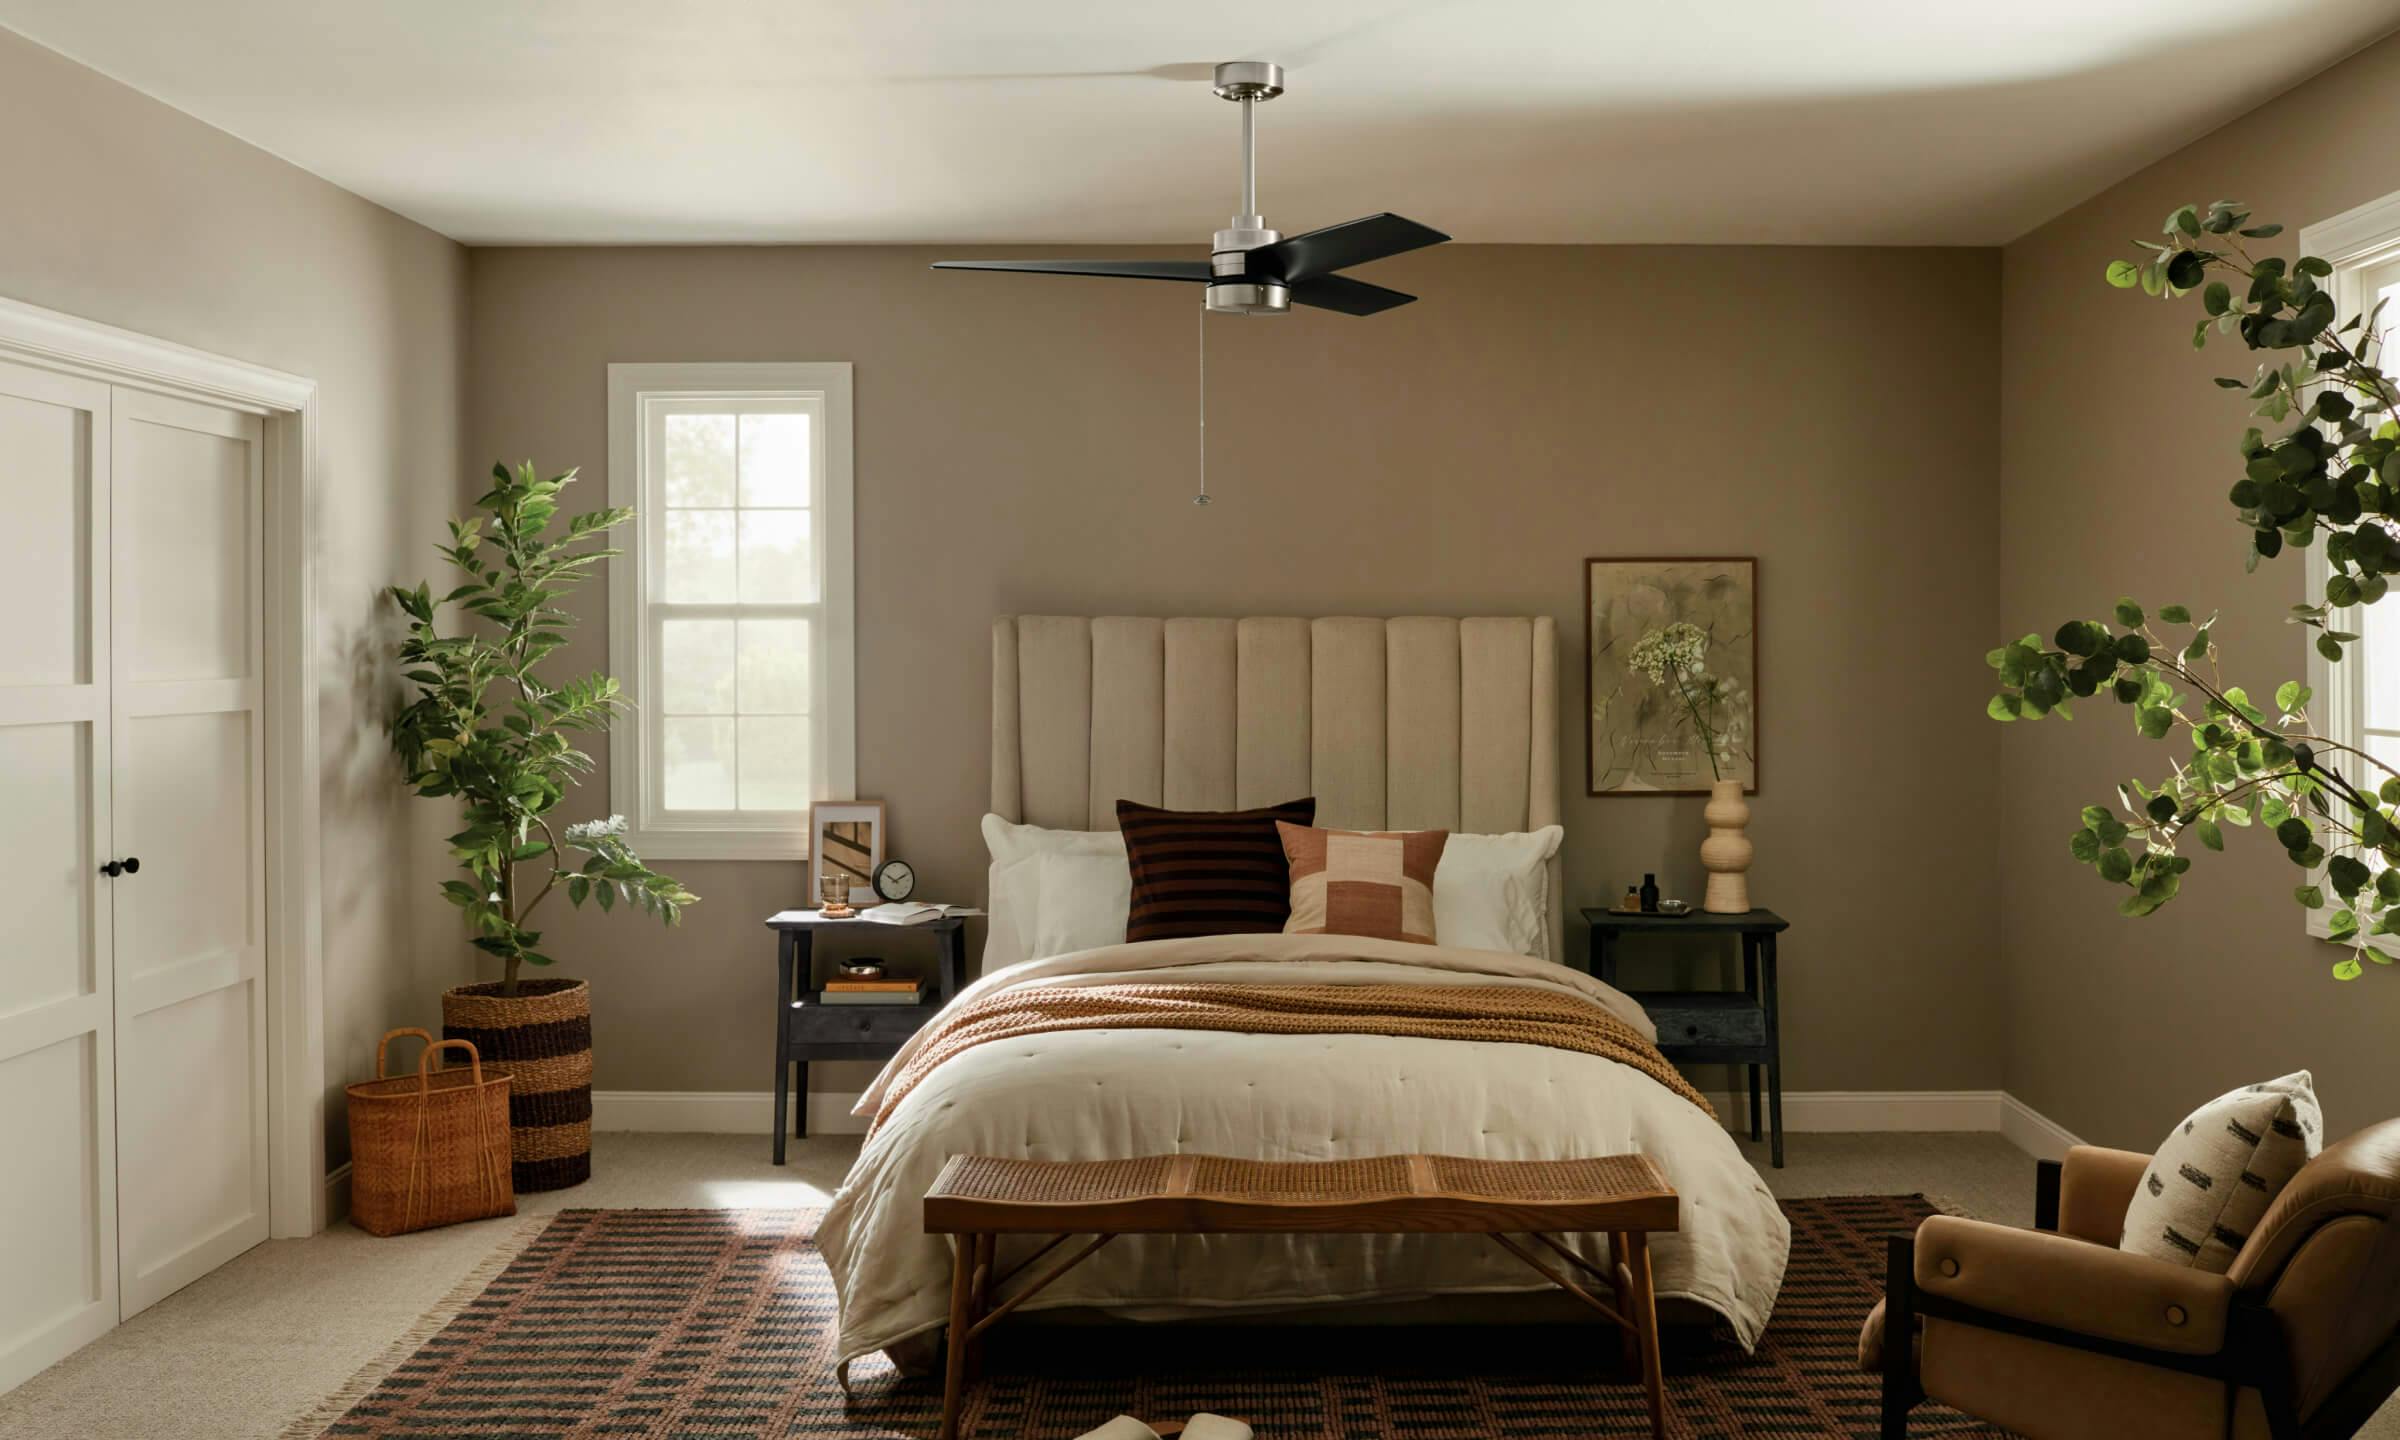 A bedroom with a Spyn fan above the bed during the day 